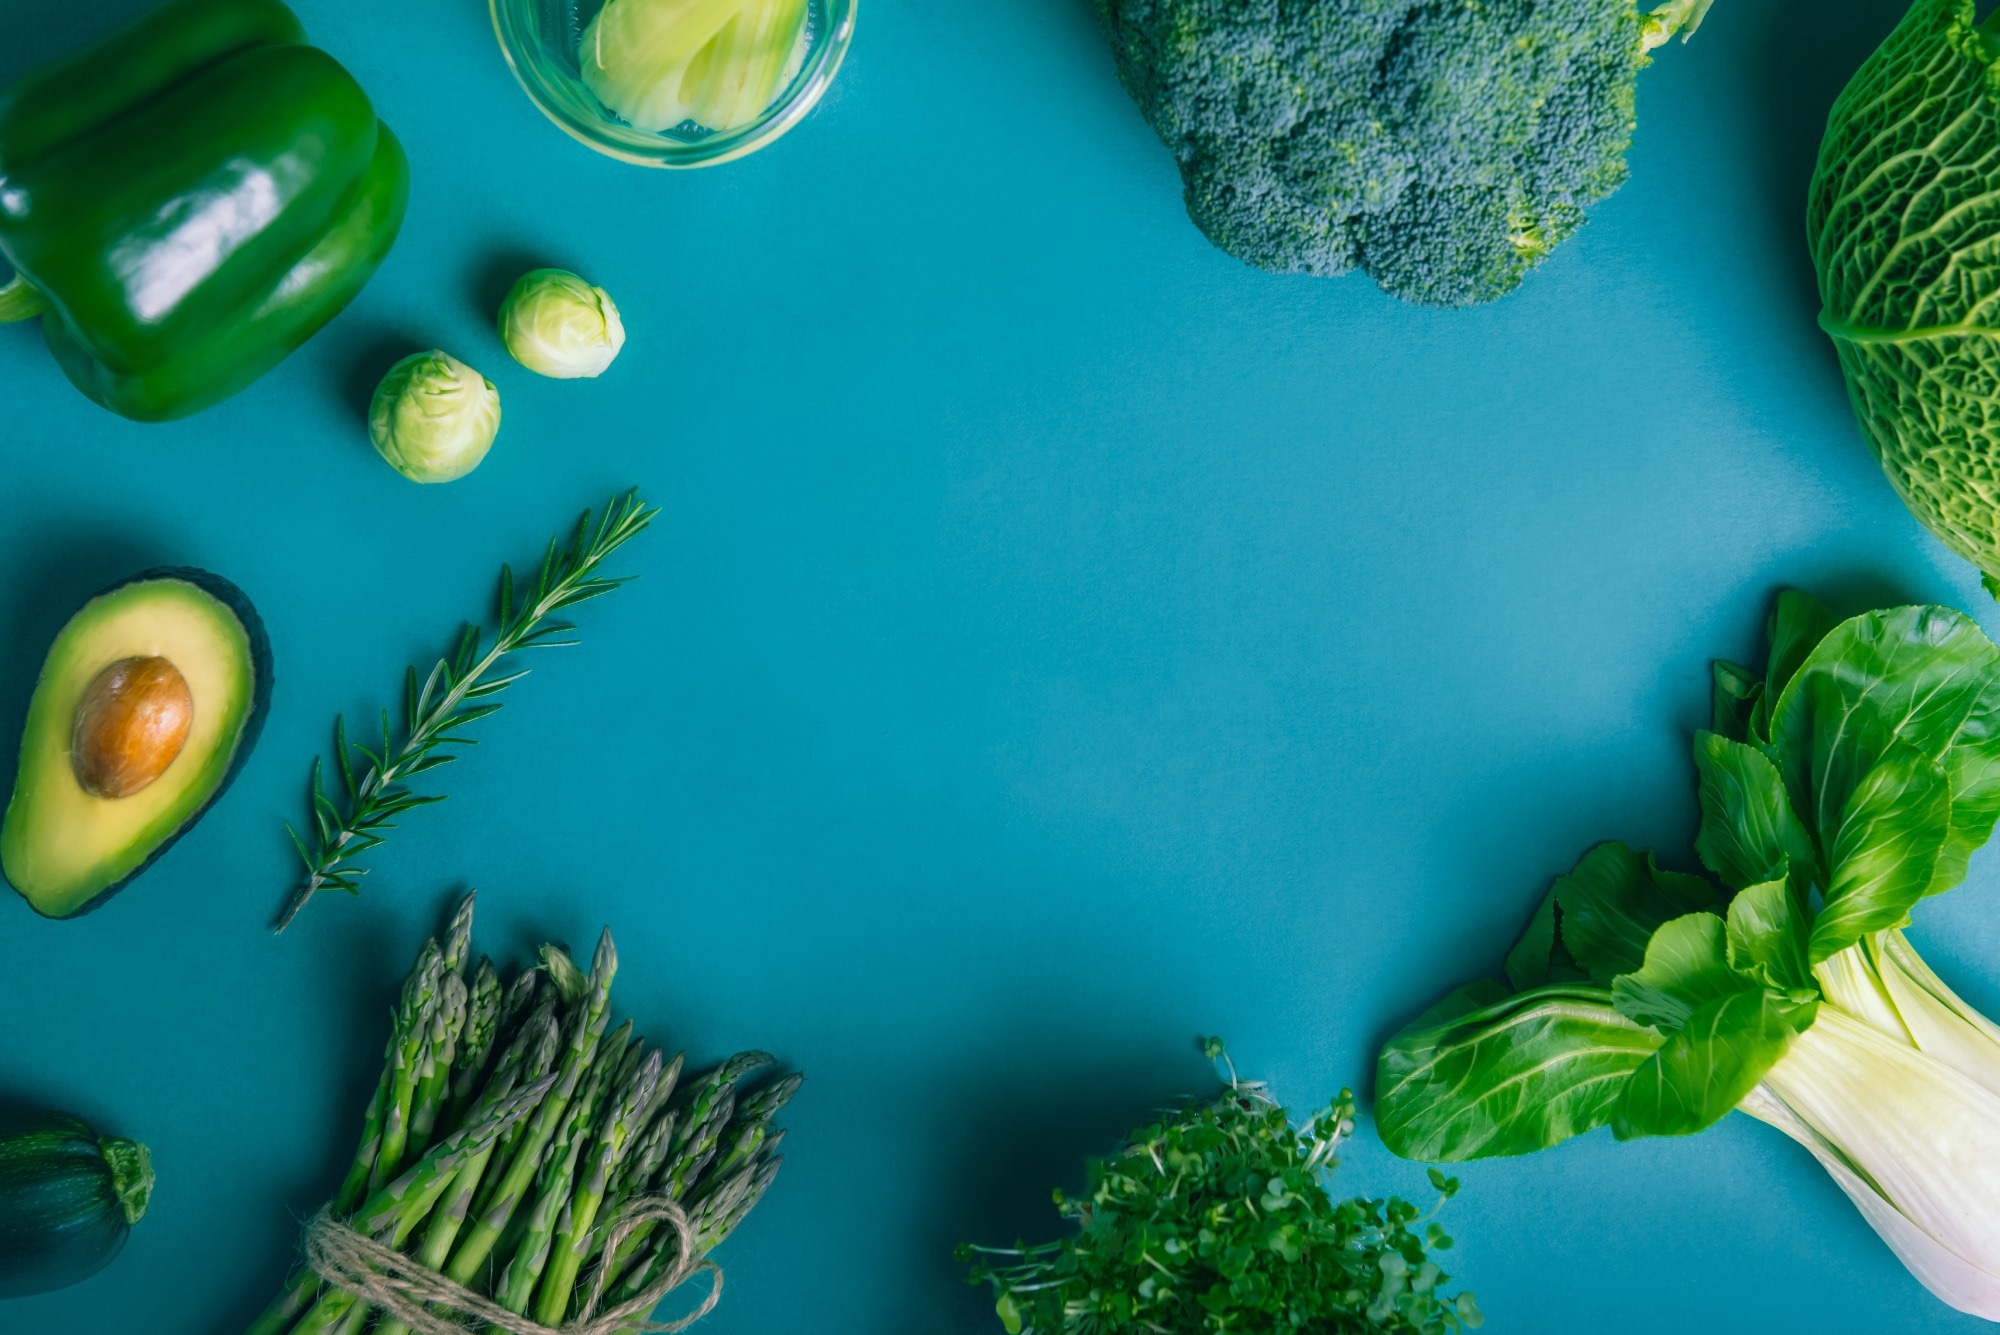 Study: Toward healthy and sustainable diets for the 21st century: Importance of sociocultural and economic considerations. Image Credit: Okrasiuk/Shutterstock.com